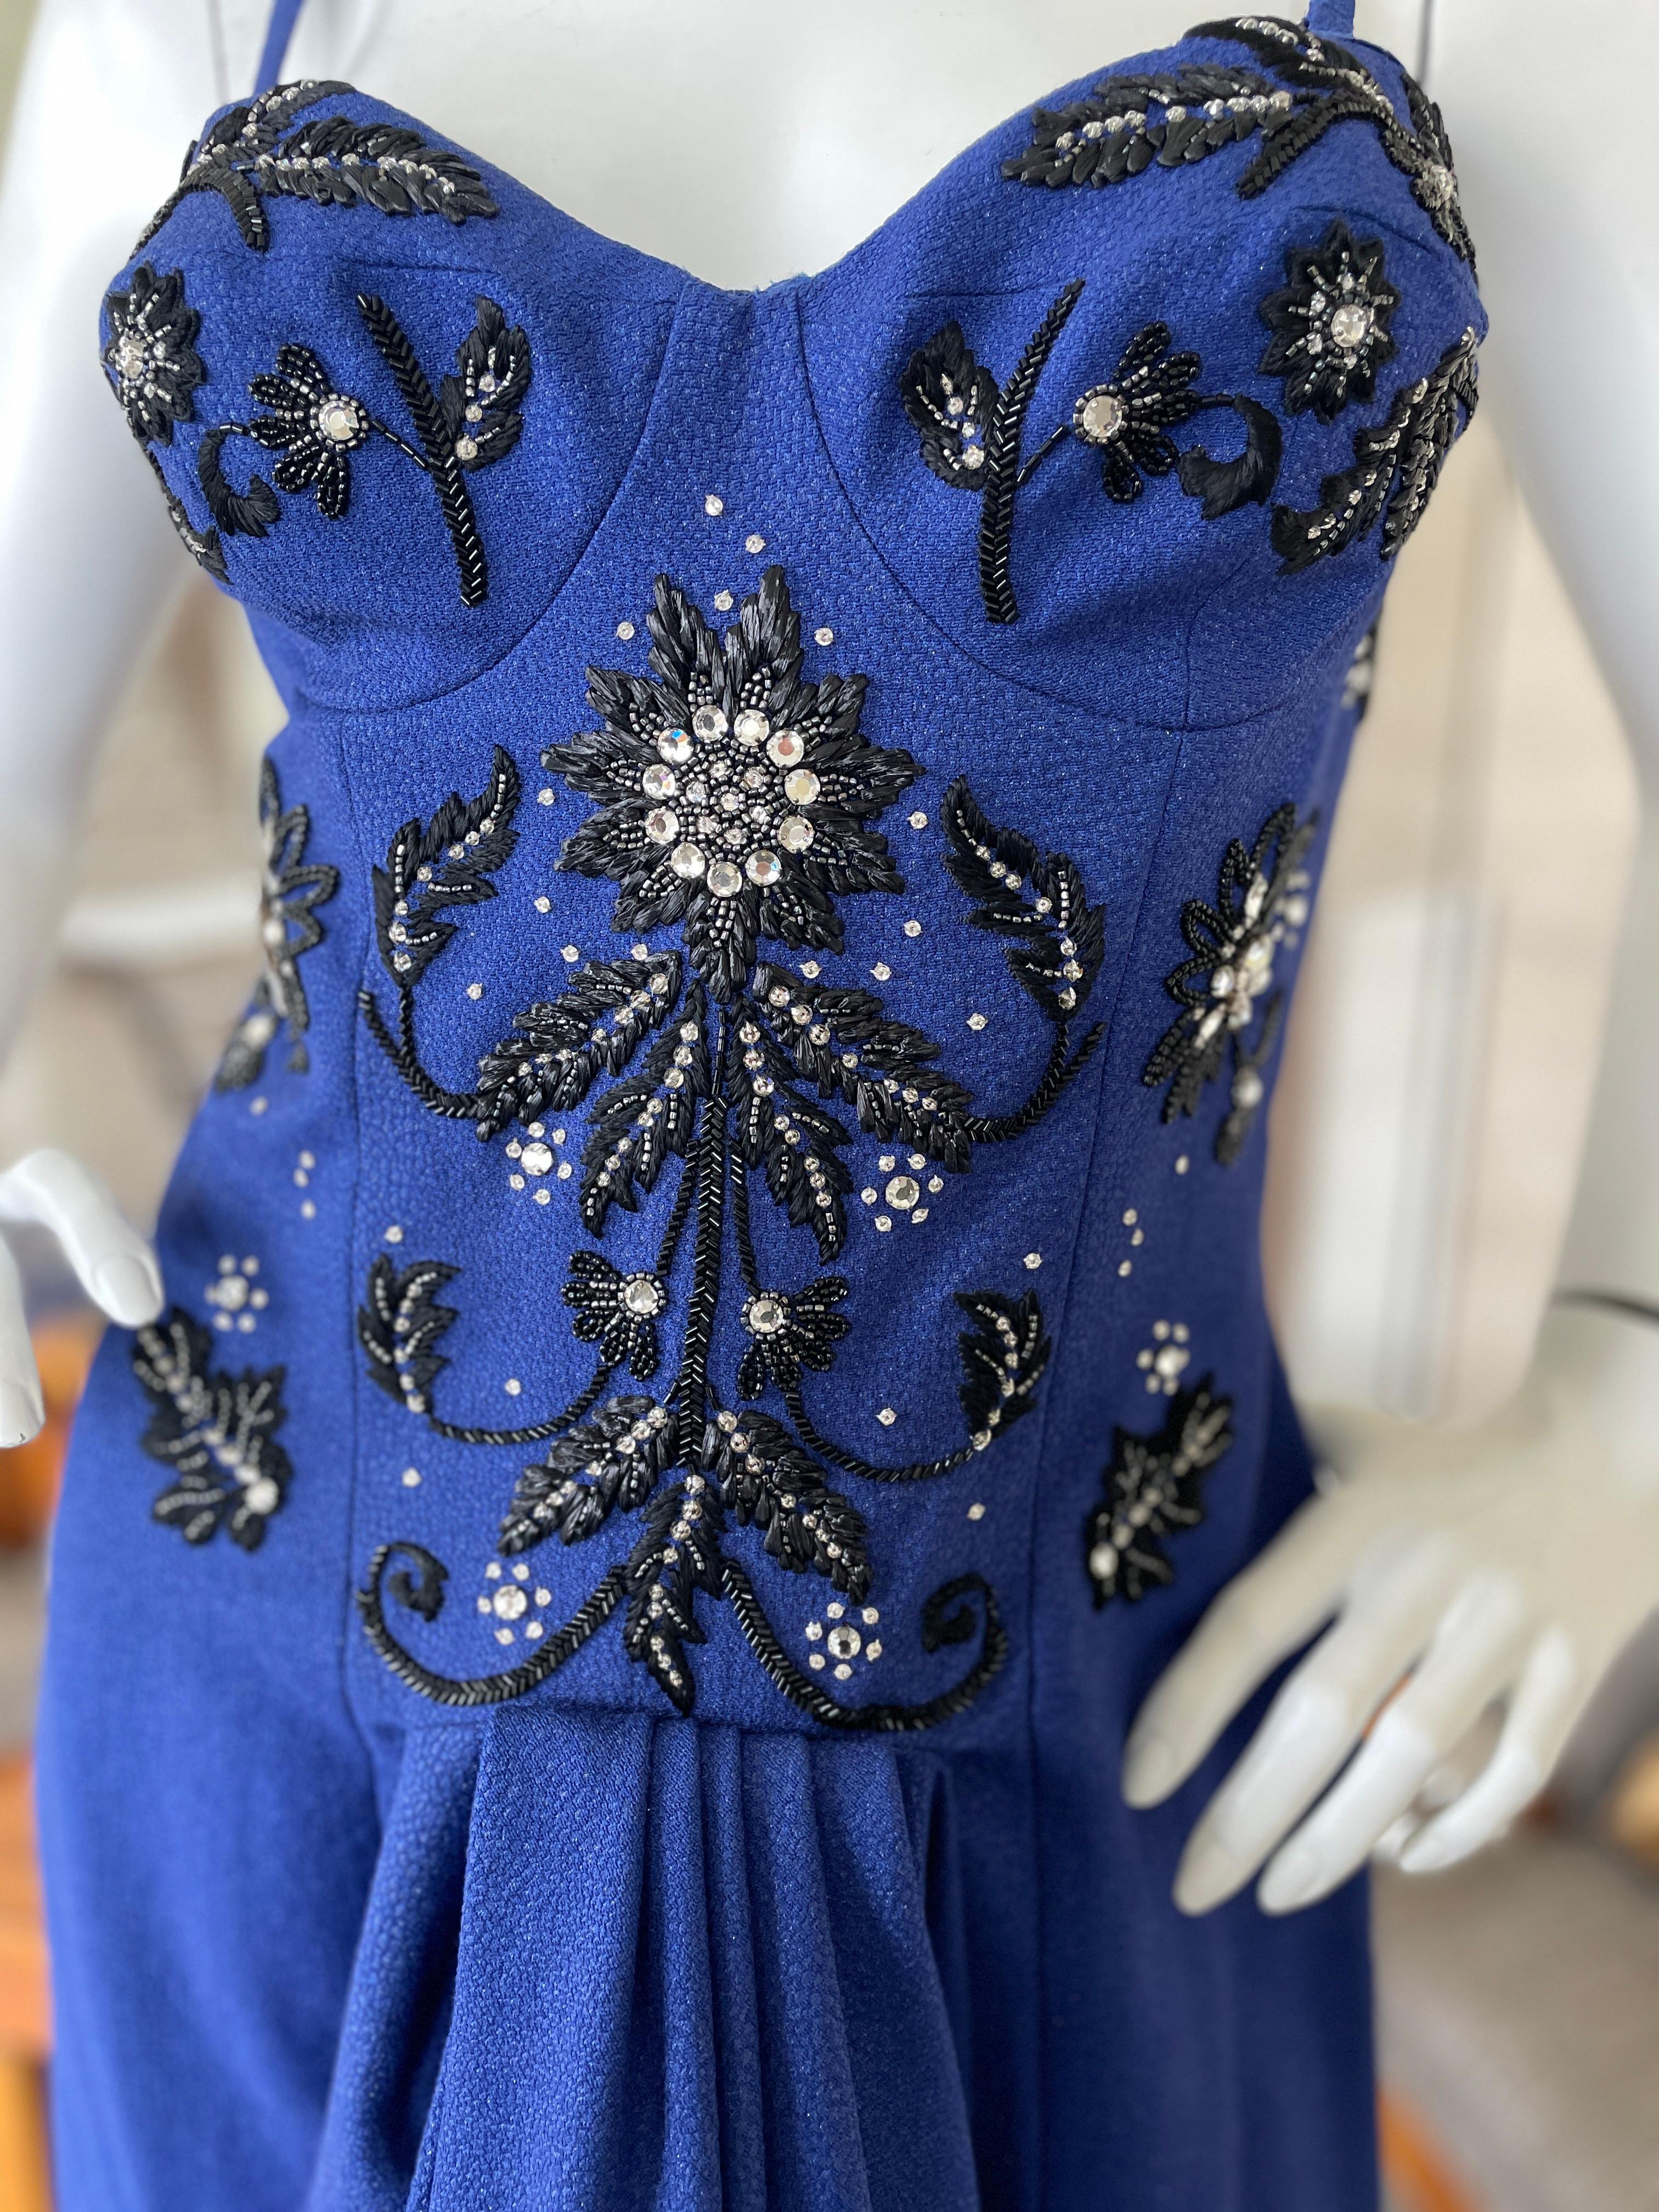 Christian Dior by John Galliano Fall 2007 Blue Dress with Crystal Details For Sale 1